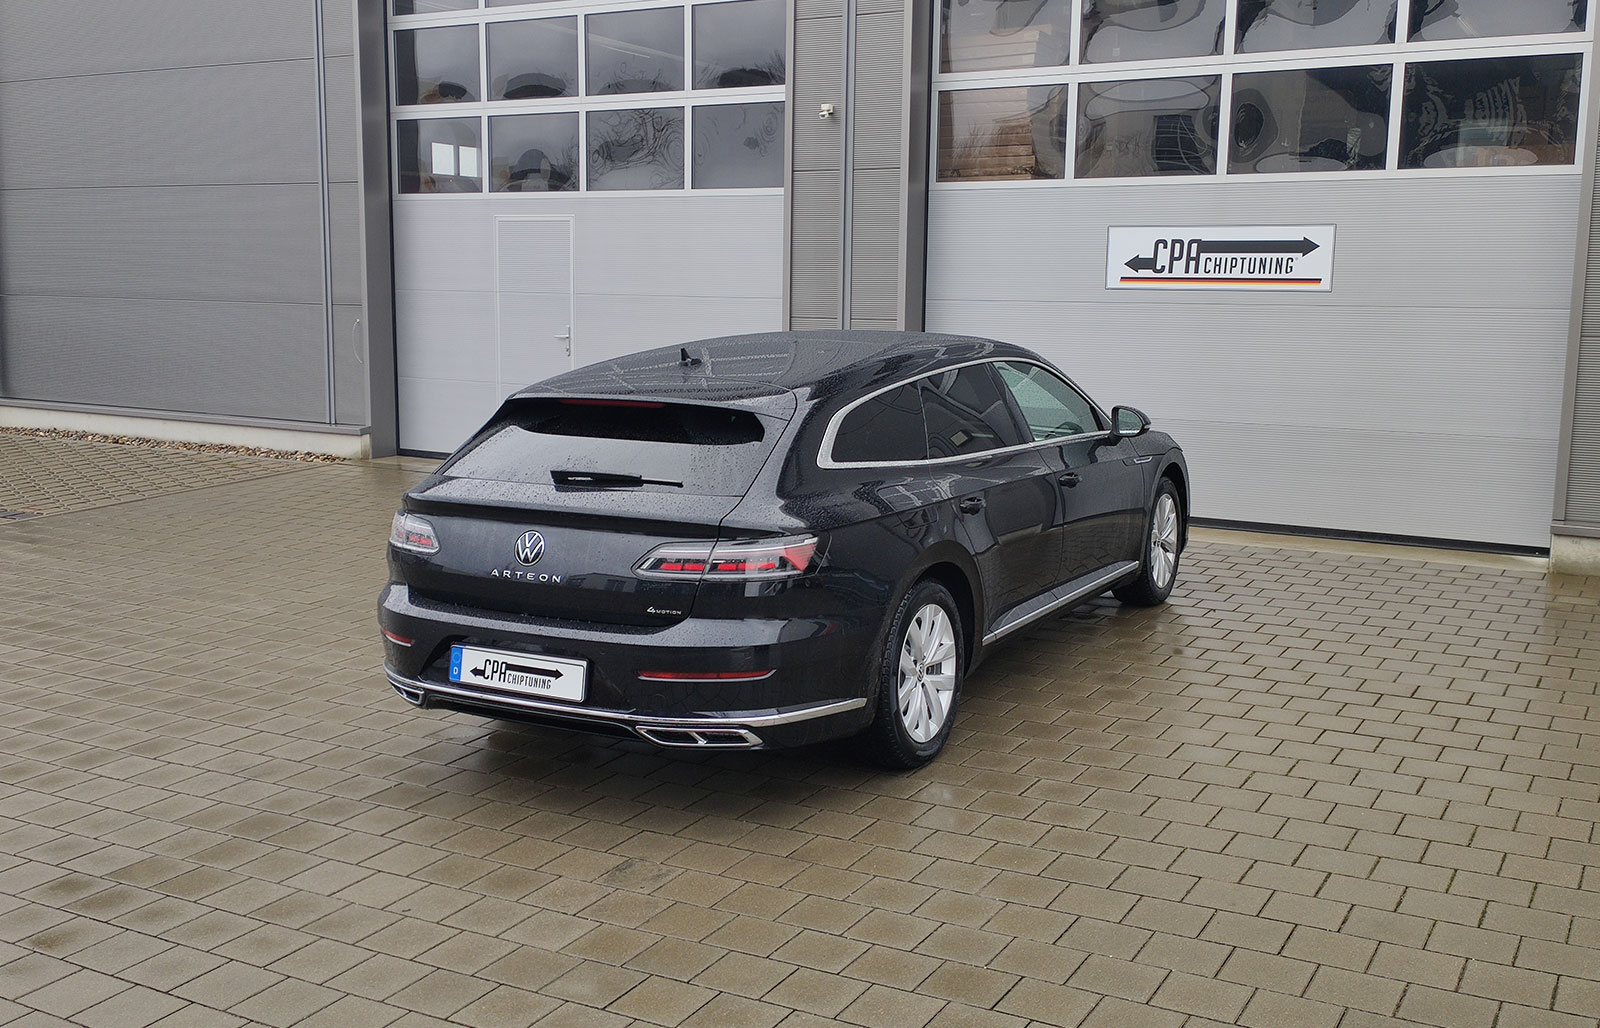 The new lifestyle truck VW Arteon Shooting Brake being tested at CPA Performance